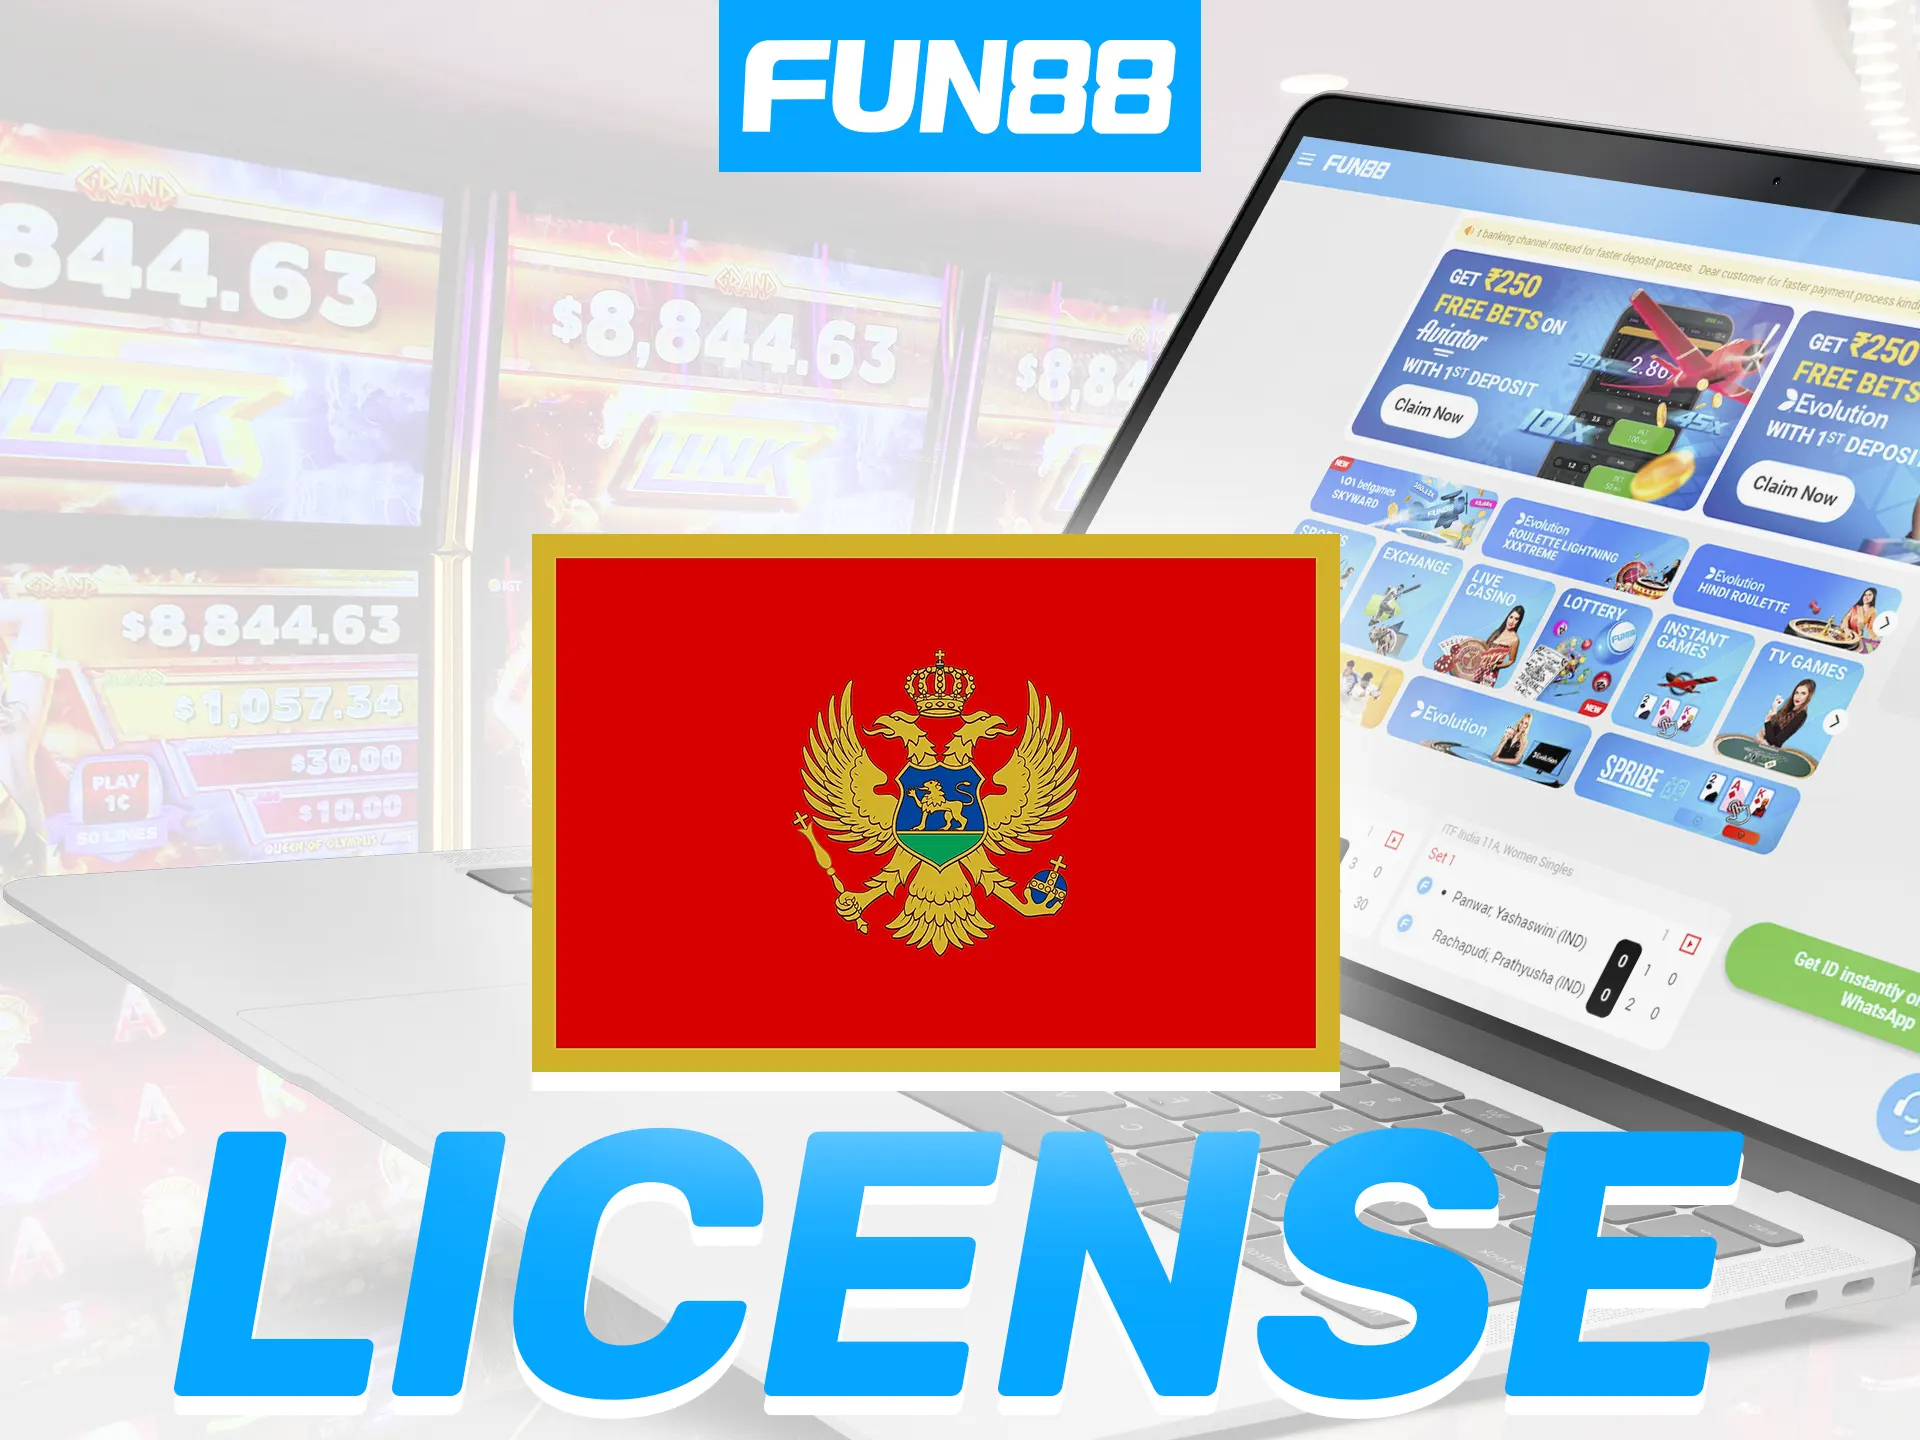 Fun88 Casino is licensed and regulated by the Montenegro government under license number 0133, ensuring safety.